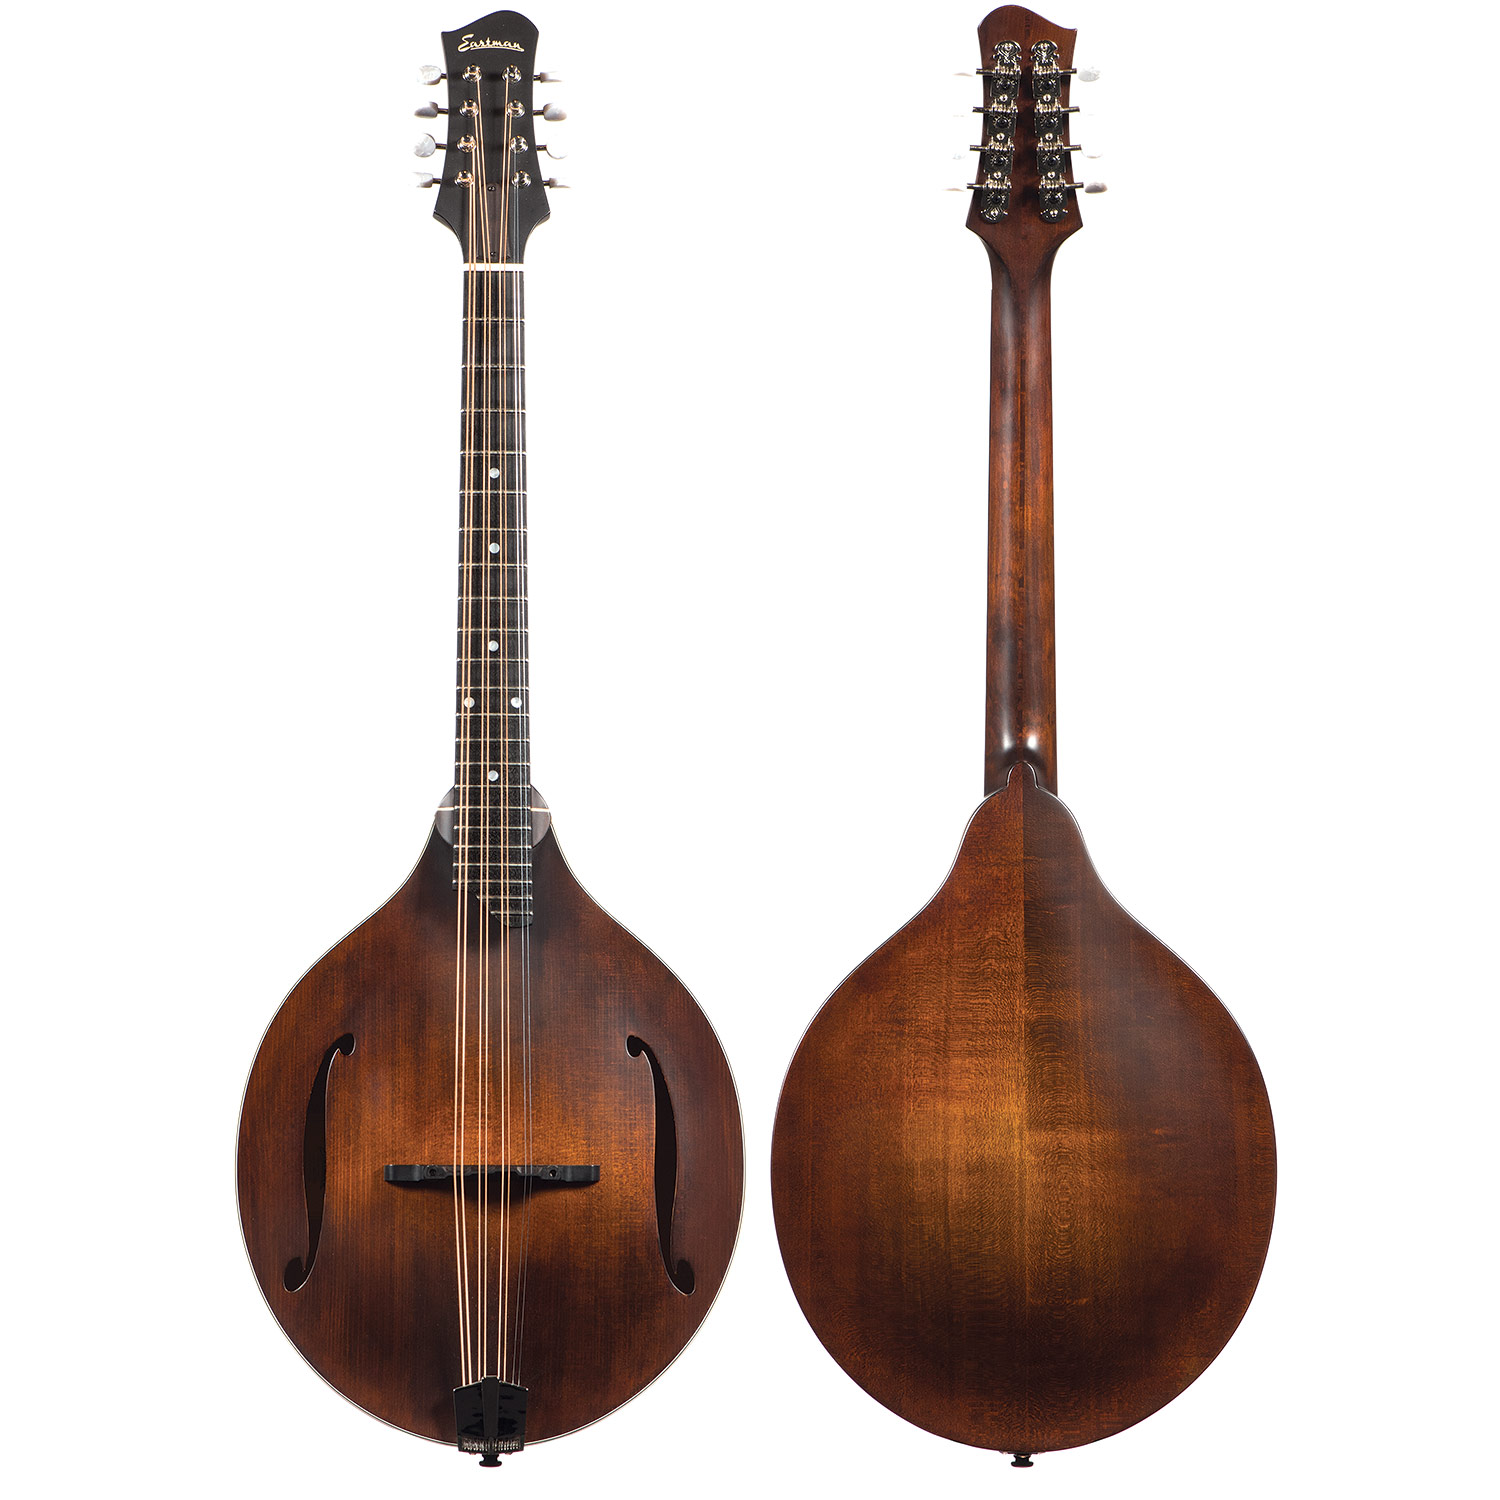 https://www.johnsonstring.com/images-for-products/instruments_bows/MDESMDO3051_A-large.jpg